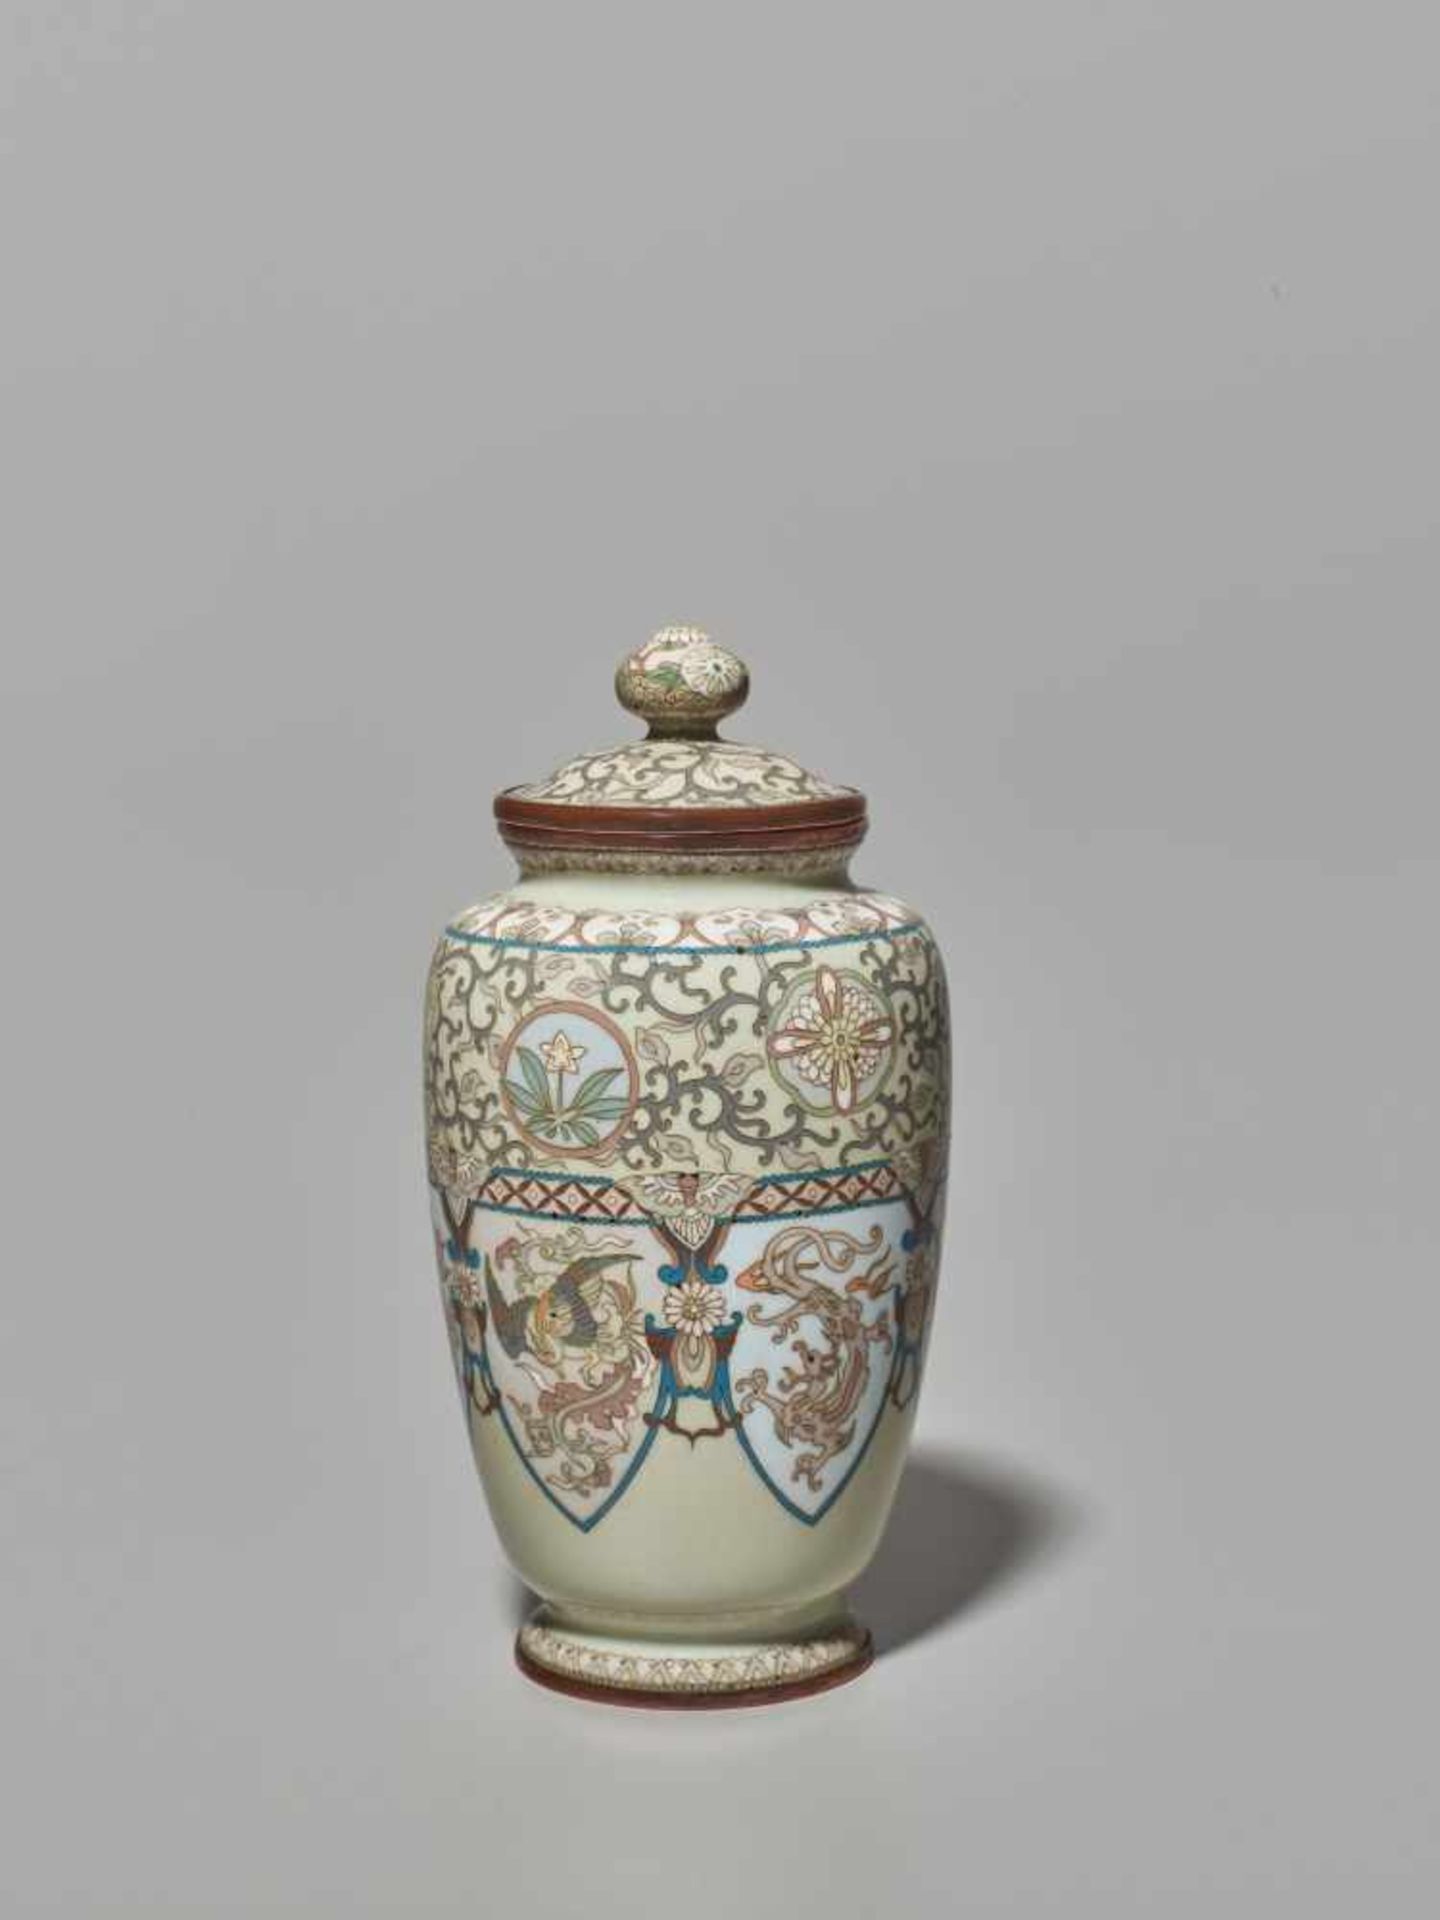 A JAPANESE CLOISONNÉ LIDDED VASE WITH A DESIGN OF PHOENIXES AND DRAGONSCloisonné with colored - Image 5 of 6